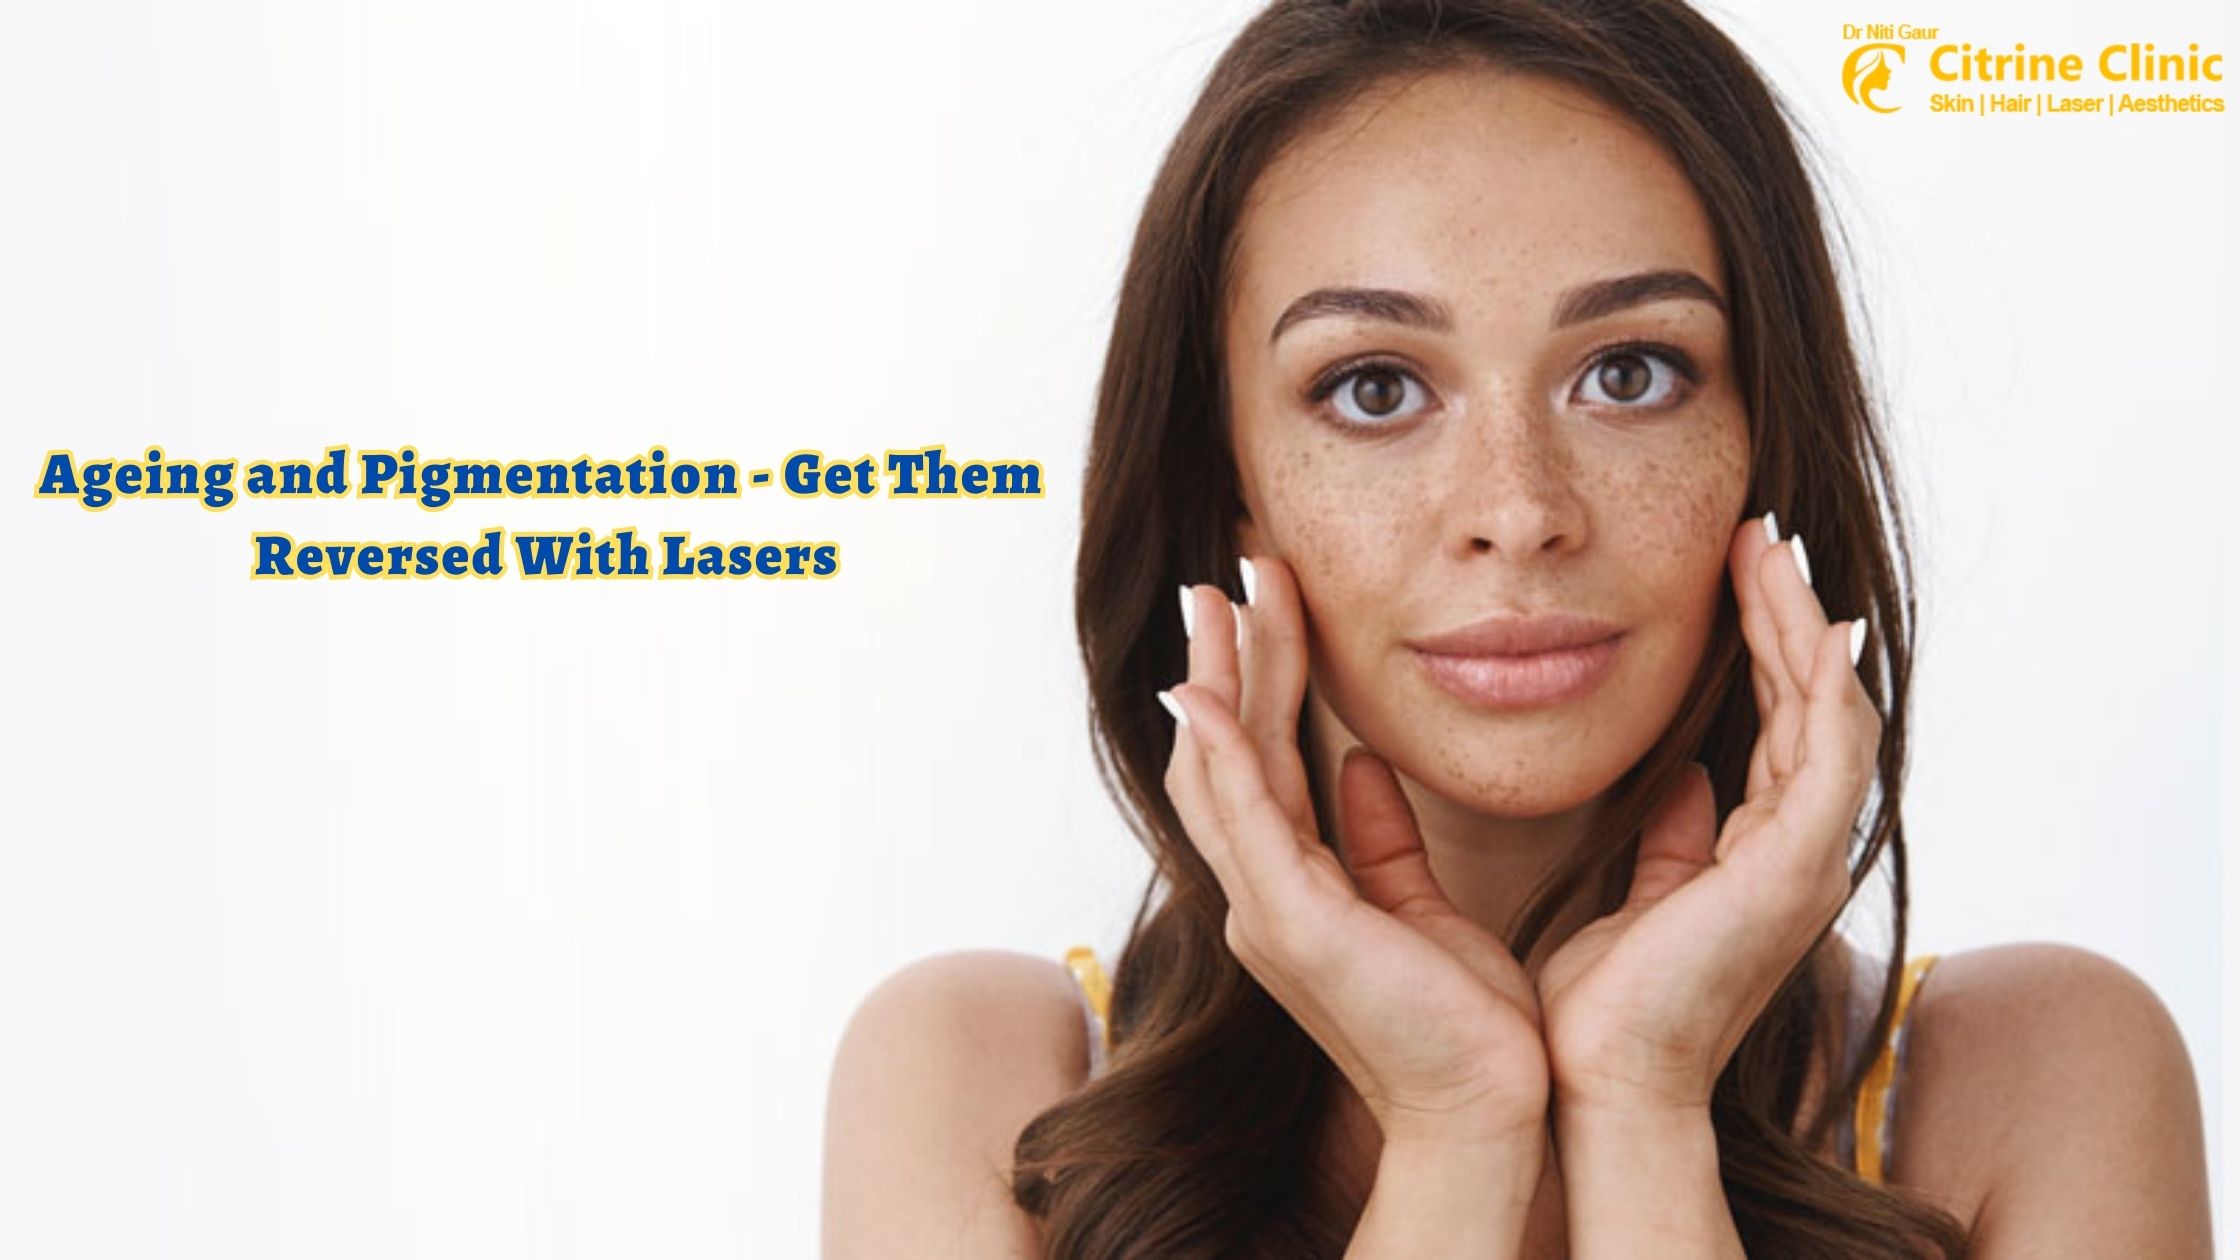 Ageing and Pigmentation- Get Them Reversed With Lasers